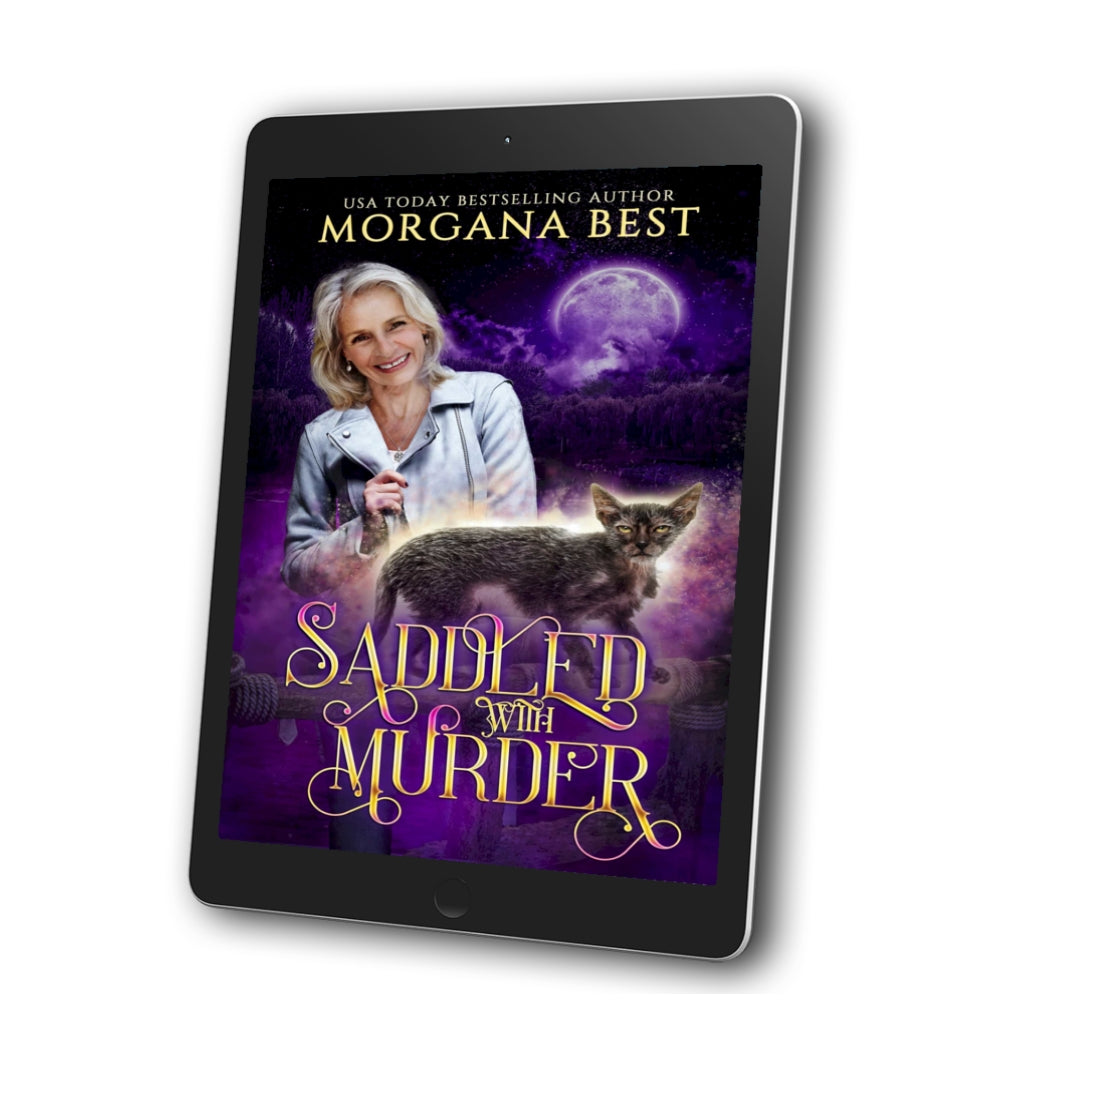 Saddled with Murder ebook paranormal  woman's fiction cozy mystery morgana best